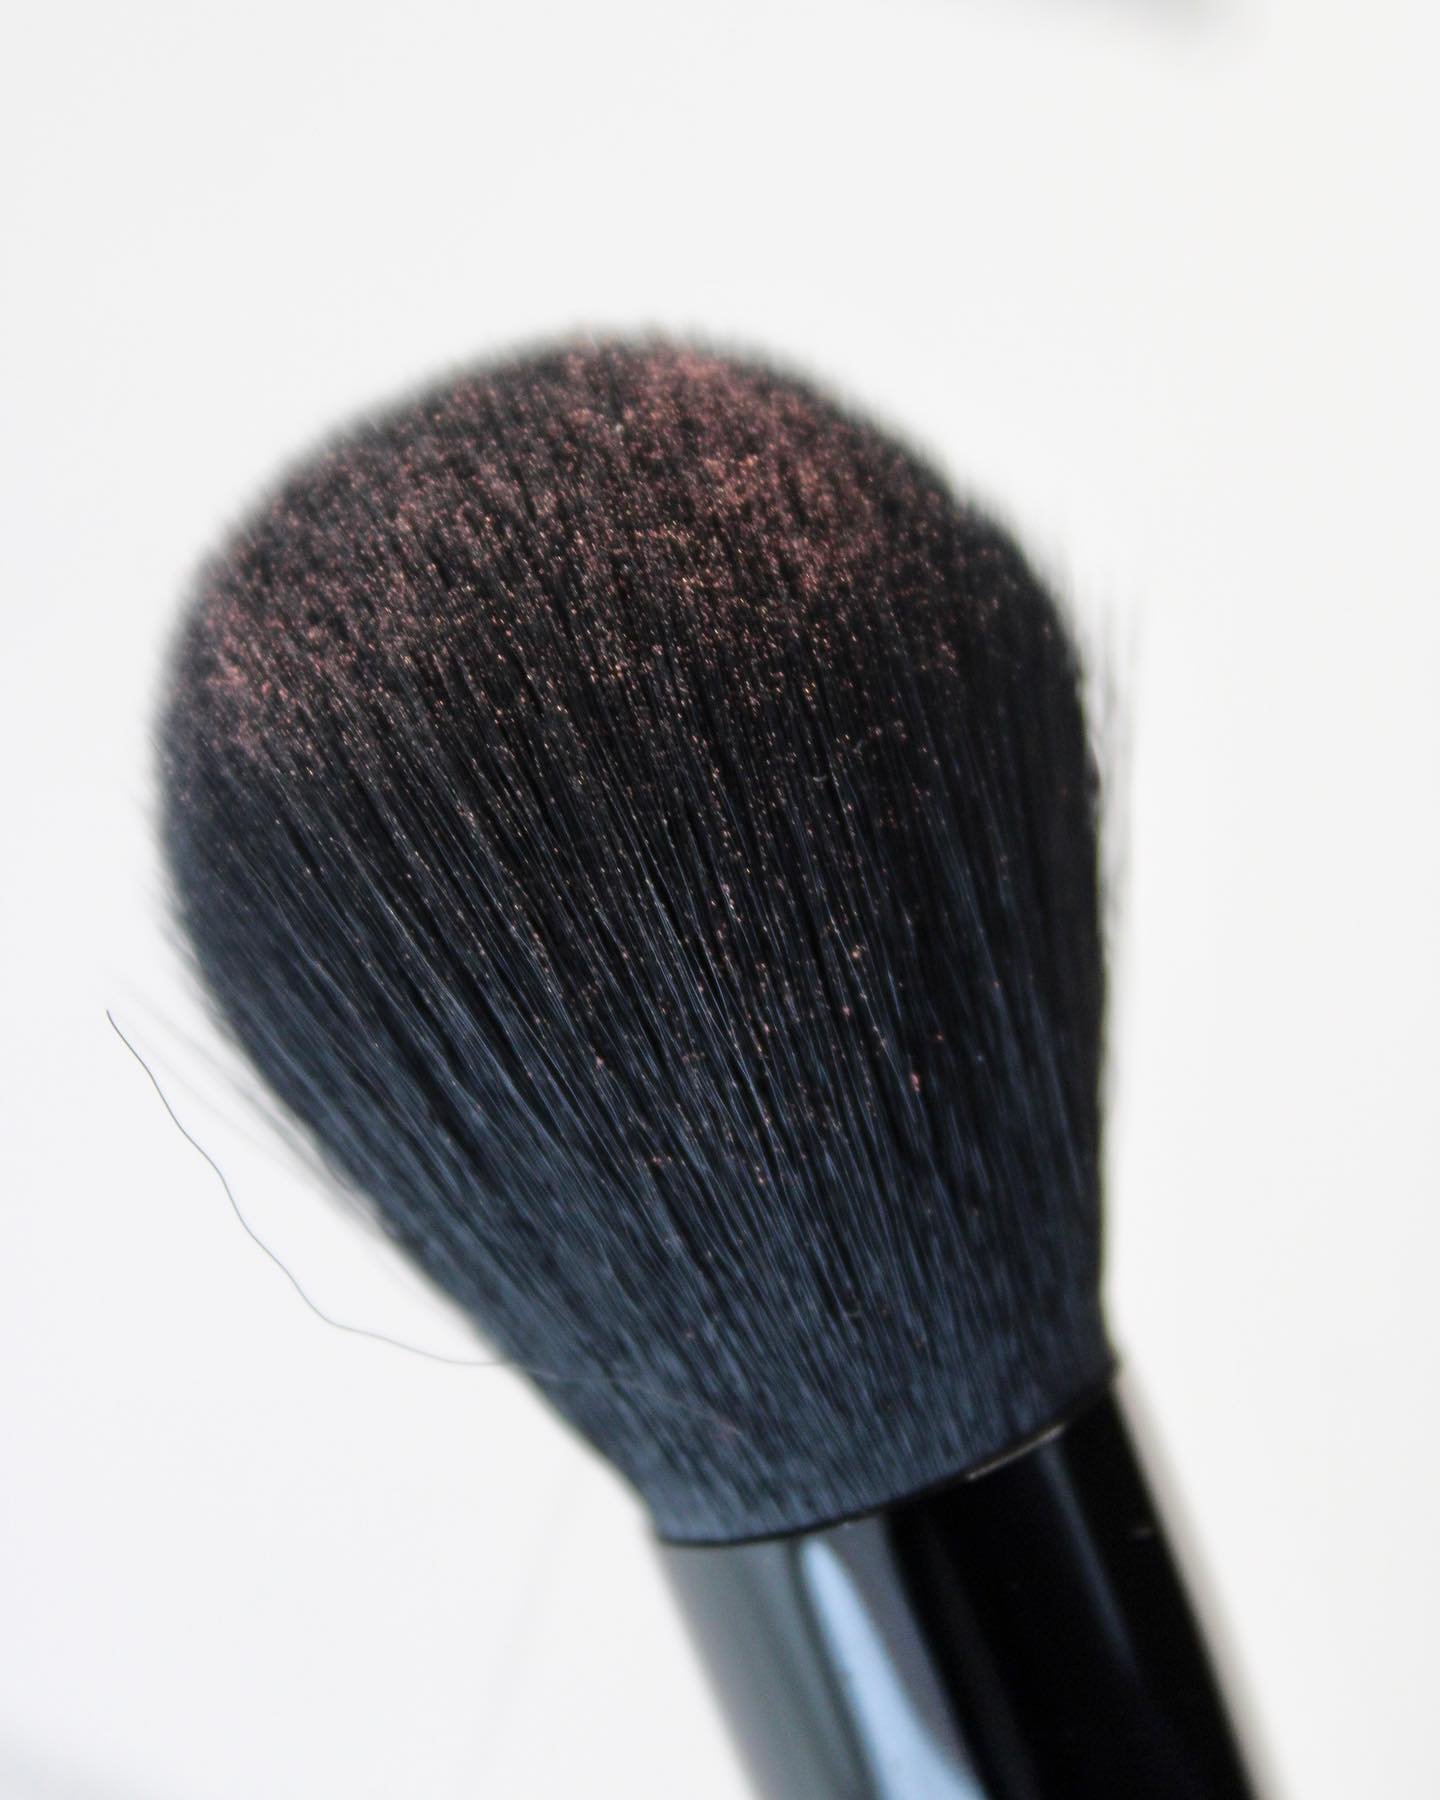 A luxury beauty brand offering makeup brushes for your favorite foundation  or translucent powder. Our makeup brushes are designed to create seamless  finish each time. Brushes perfect for blending cream blush, eyebrows,